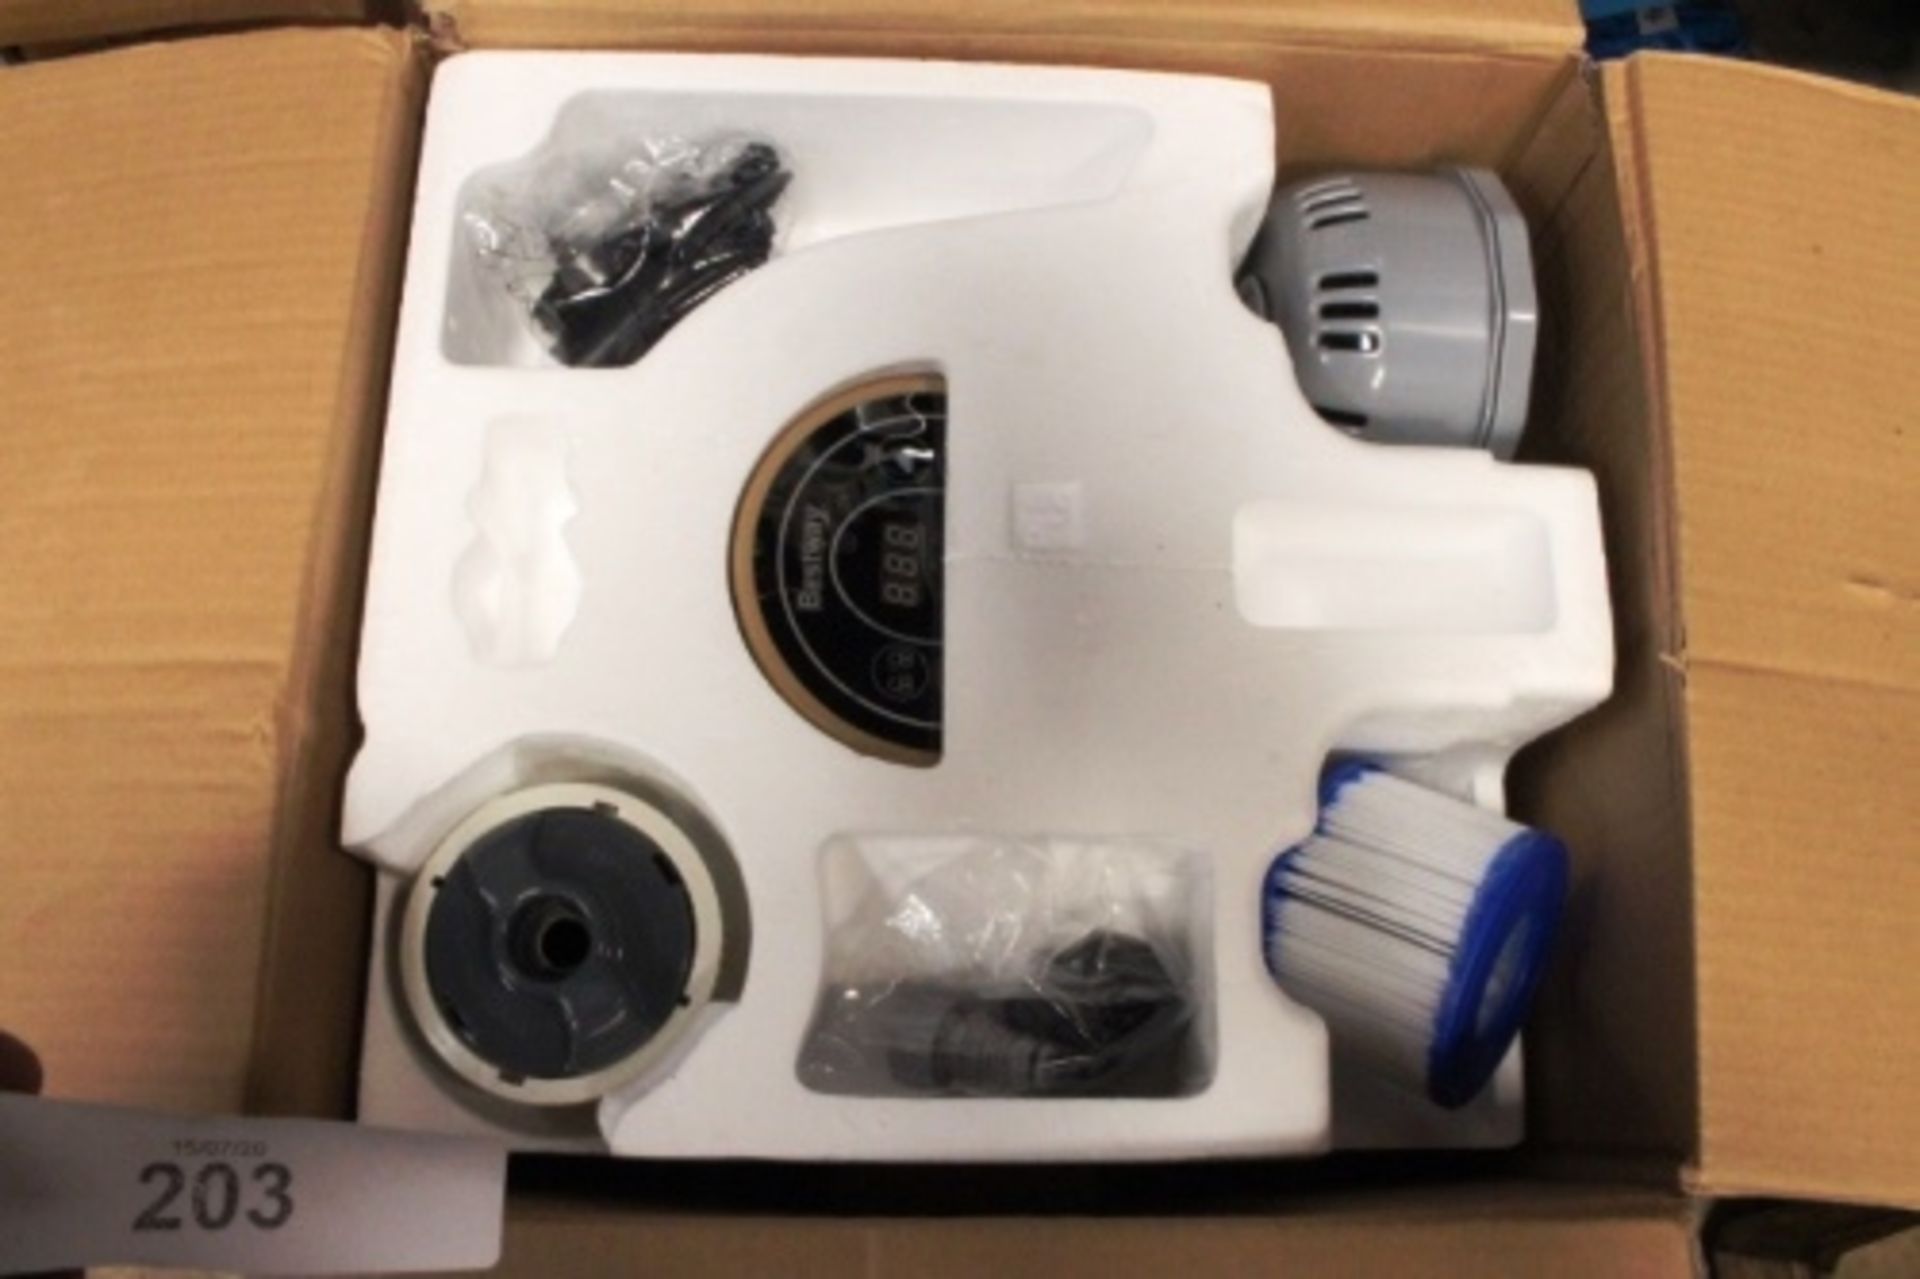 1 x Bestway Jacuzzi pump, model 204002002299 - New in box, box open, unchecked (GS16) - Image 2 of 3